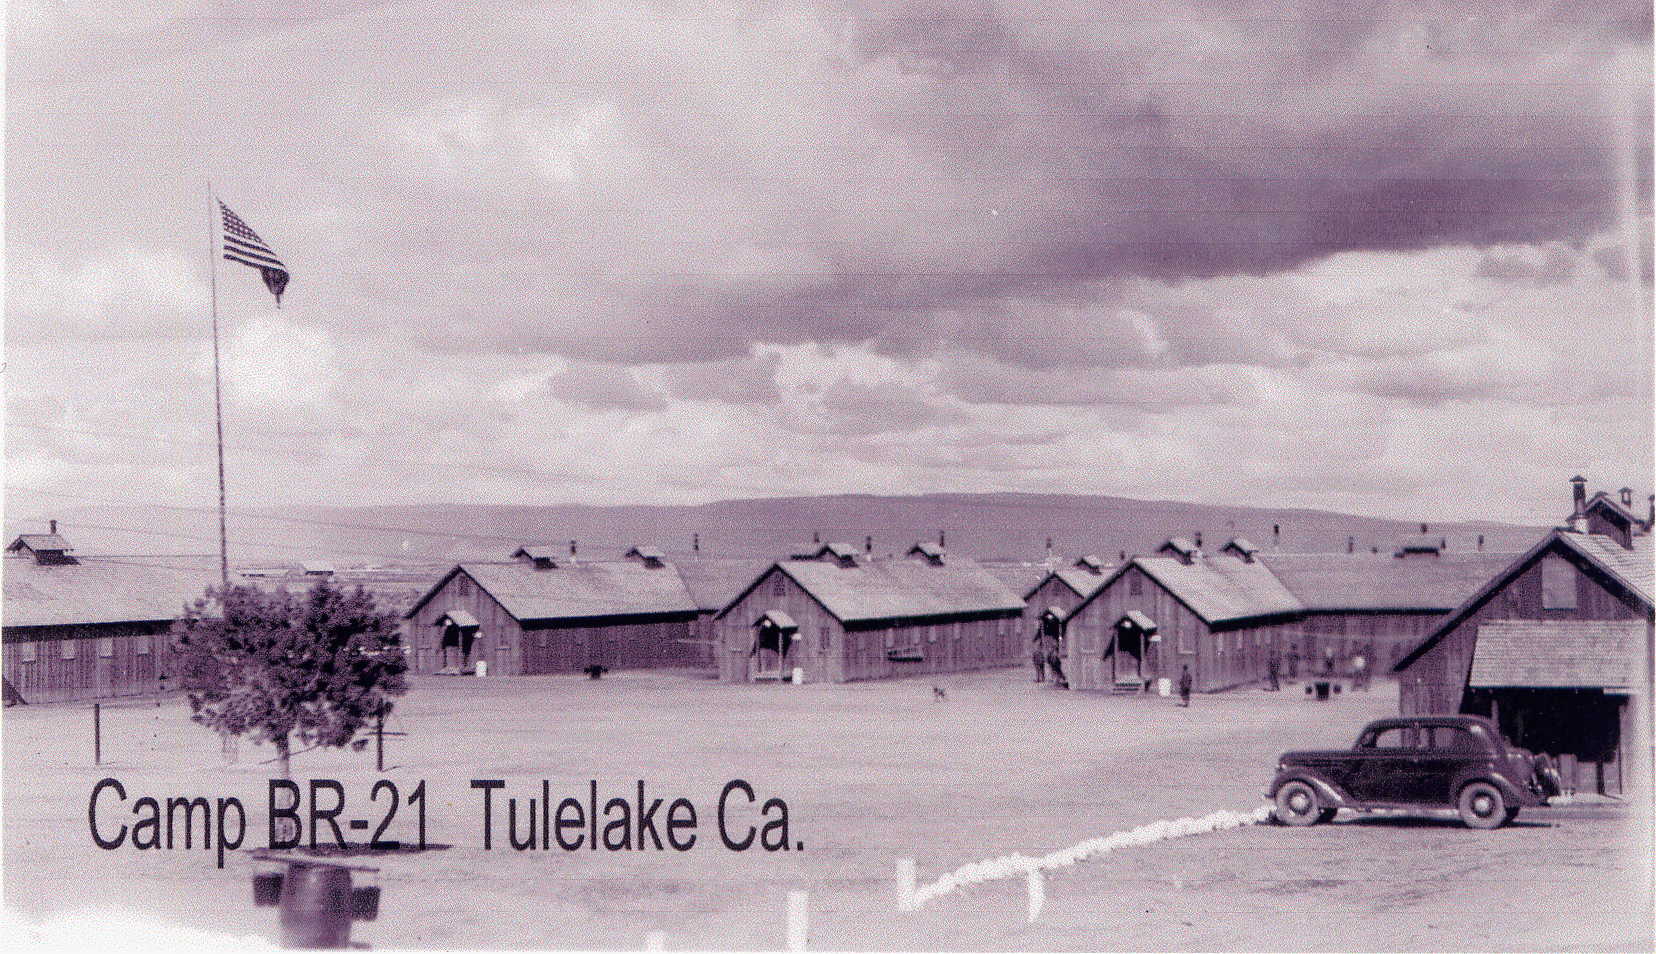 Camp Tulelake as a CCC Camp in 1936